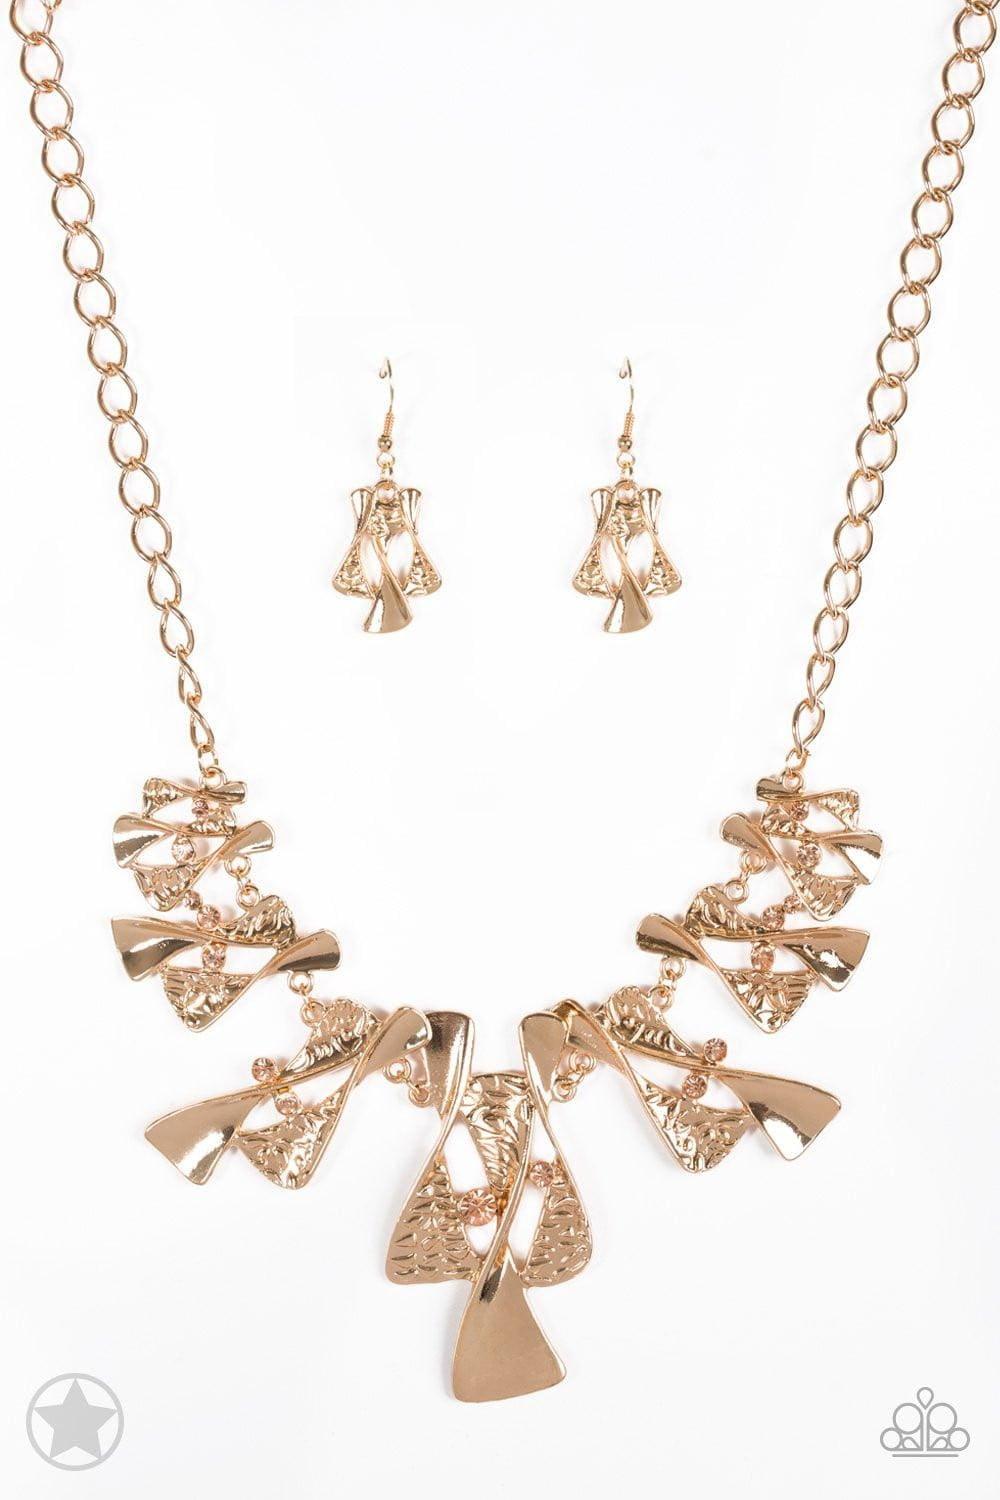 Paparazzi Accessories - Paparazzi Blockbuster Necklace: Sands Of Time Gold - Bling by JessieK